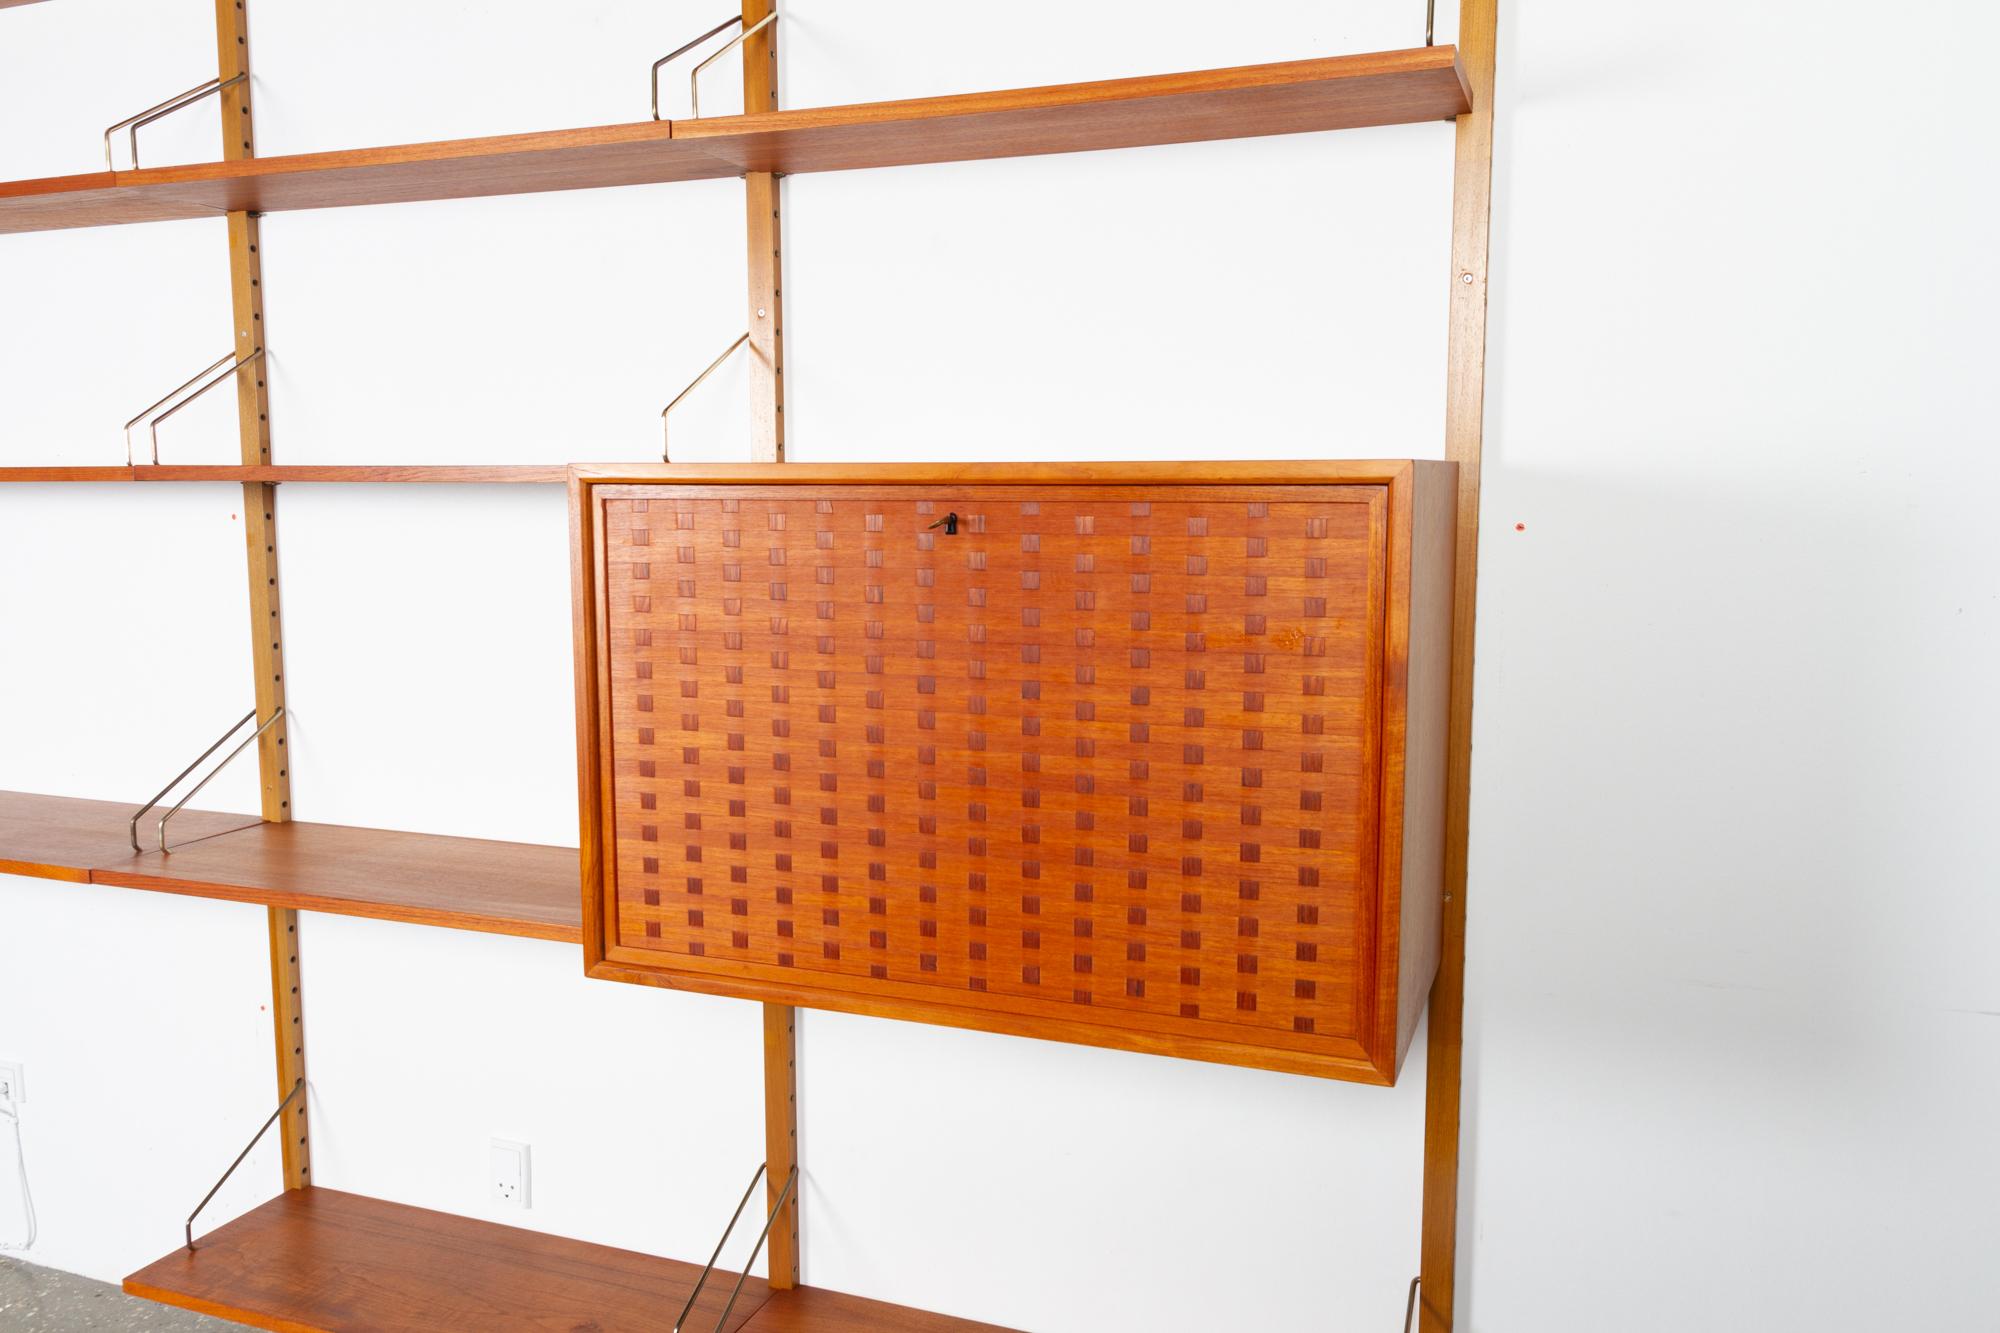 Vintage Danish teak wall unit by Poul Cadovius for Cado, 1960s
Three sections of modular wall-mounted shelves and cabinet in teak model Royal. All shelves and cabinet in this shelving system are adjustable and can be placed as desired. The vertical